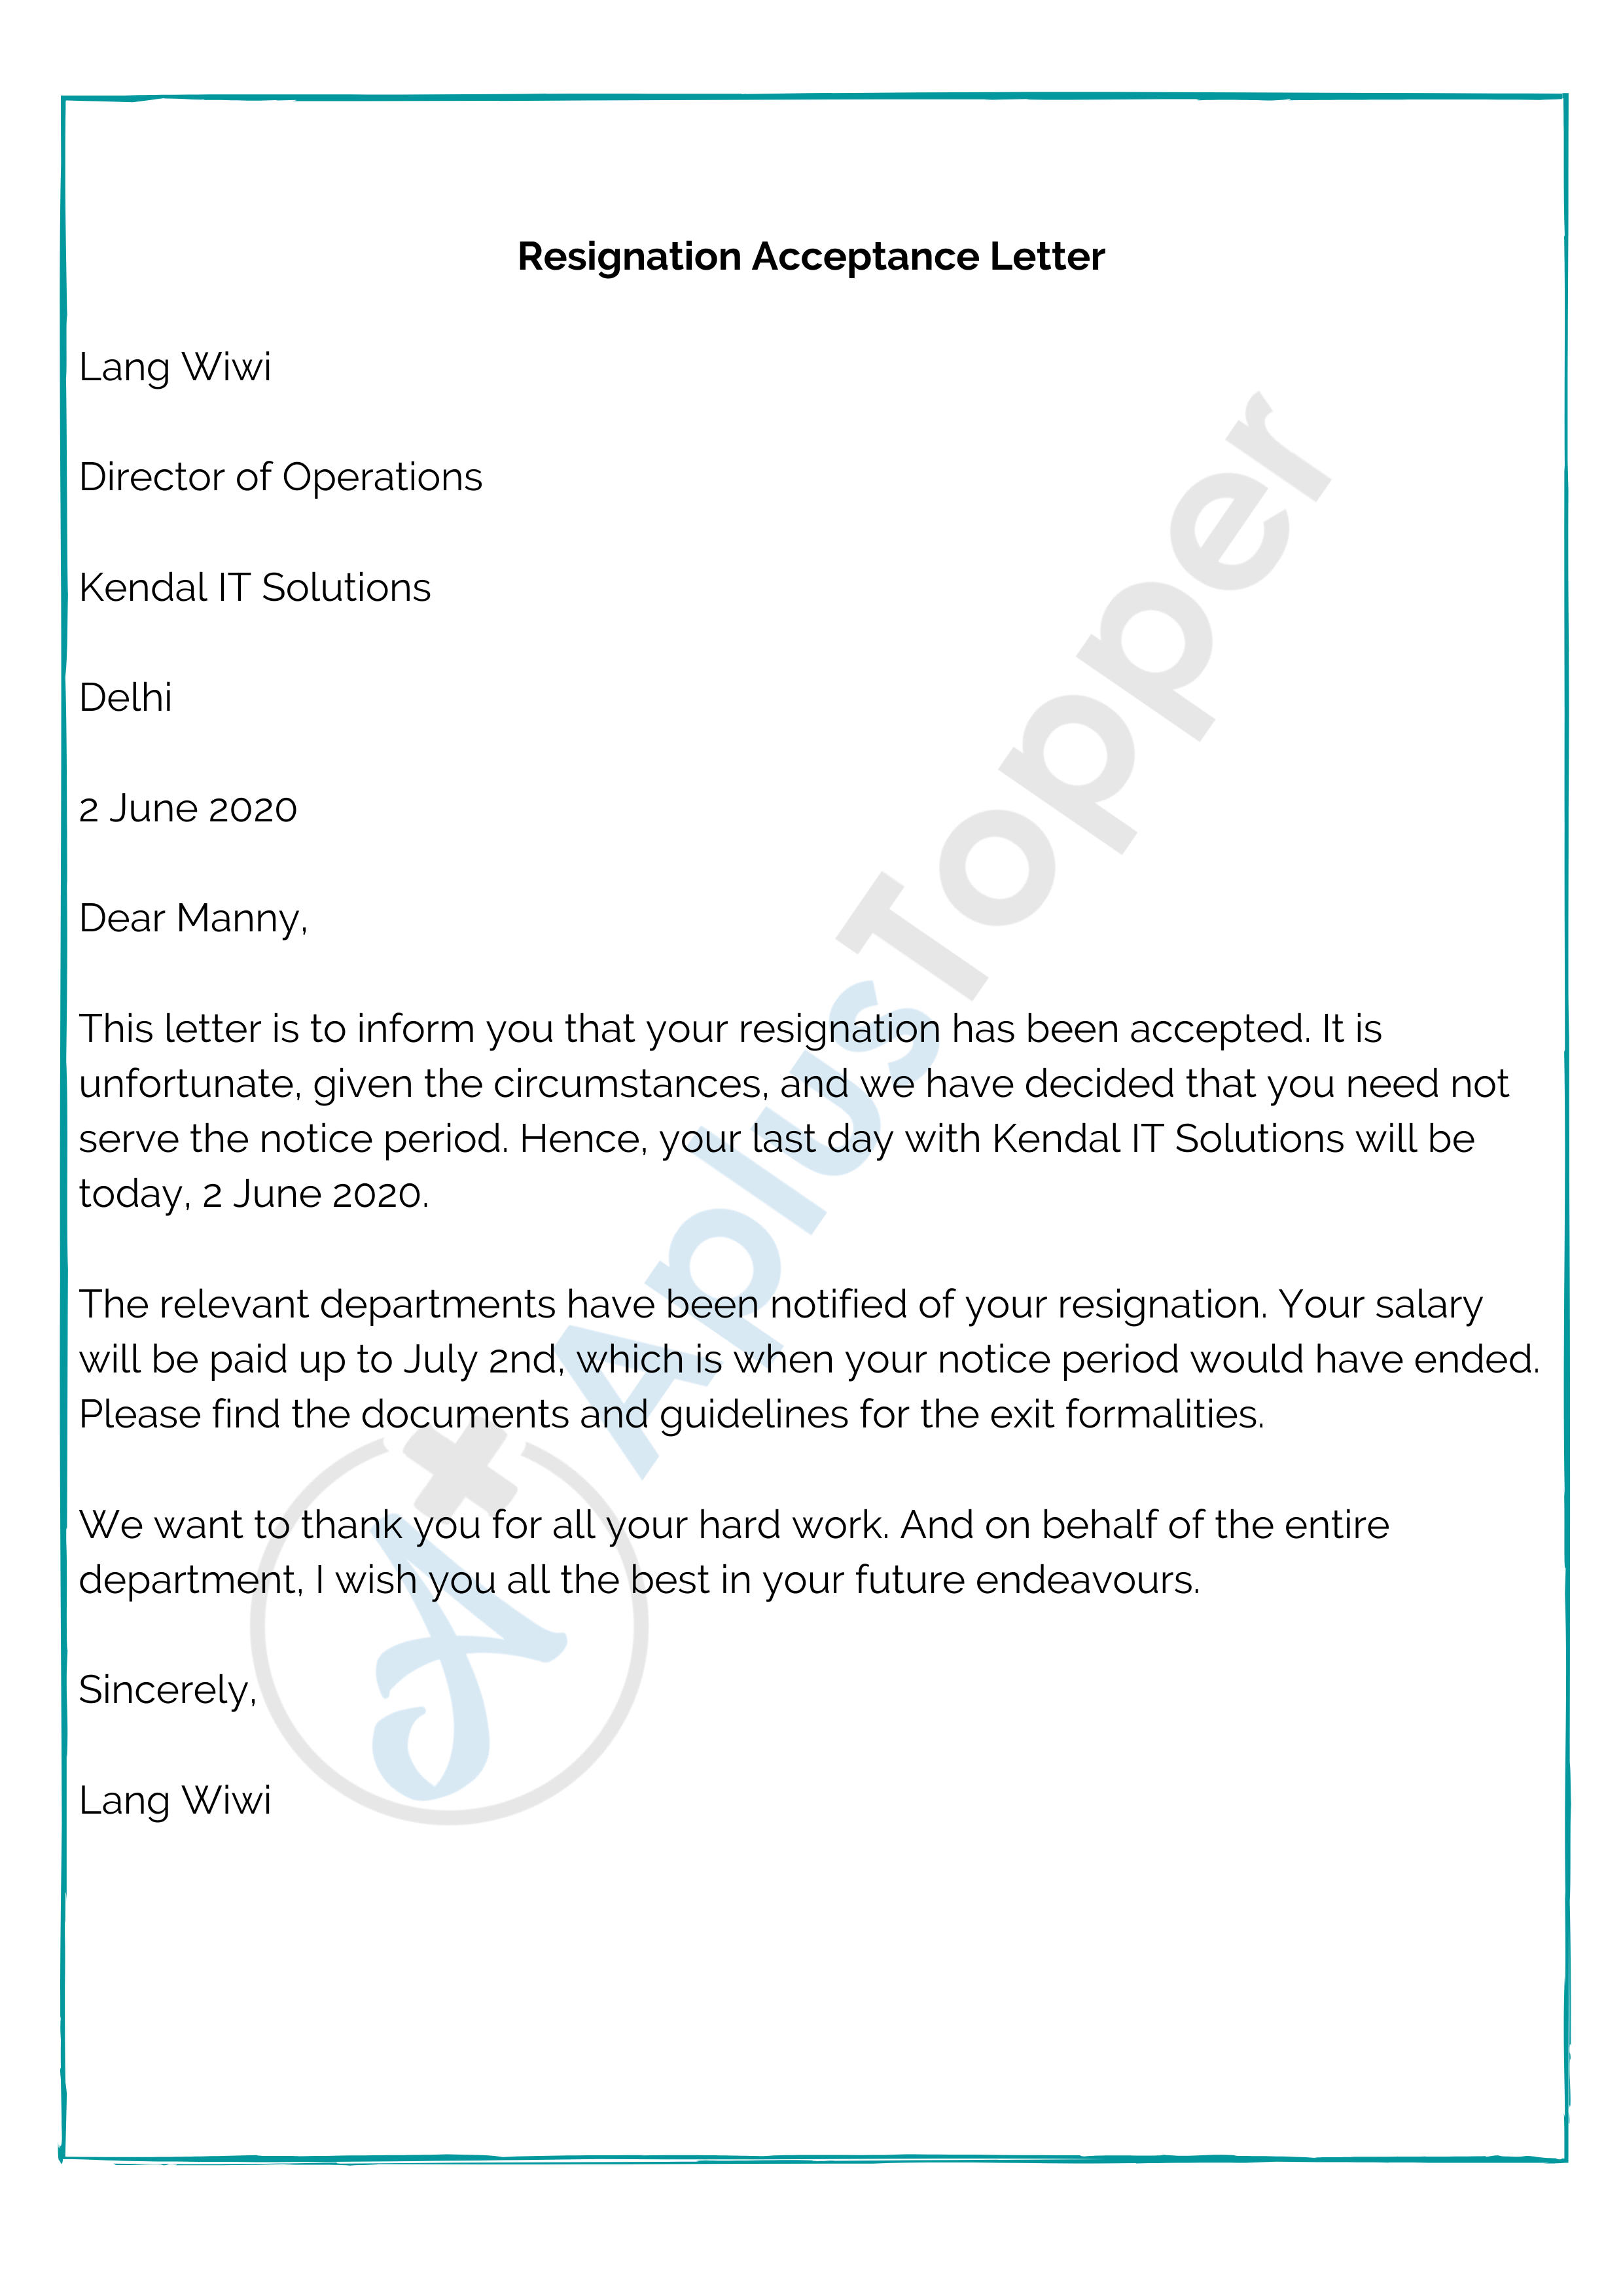 Resignation Acceptance Letter (Employee Does Not Serve Notice Period)